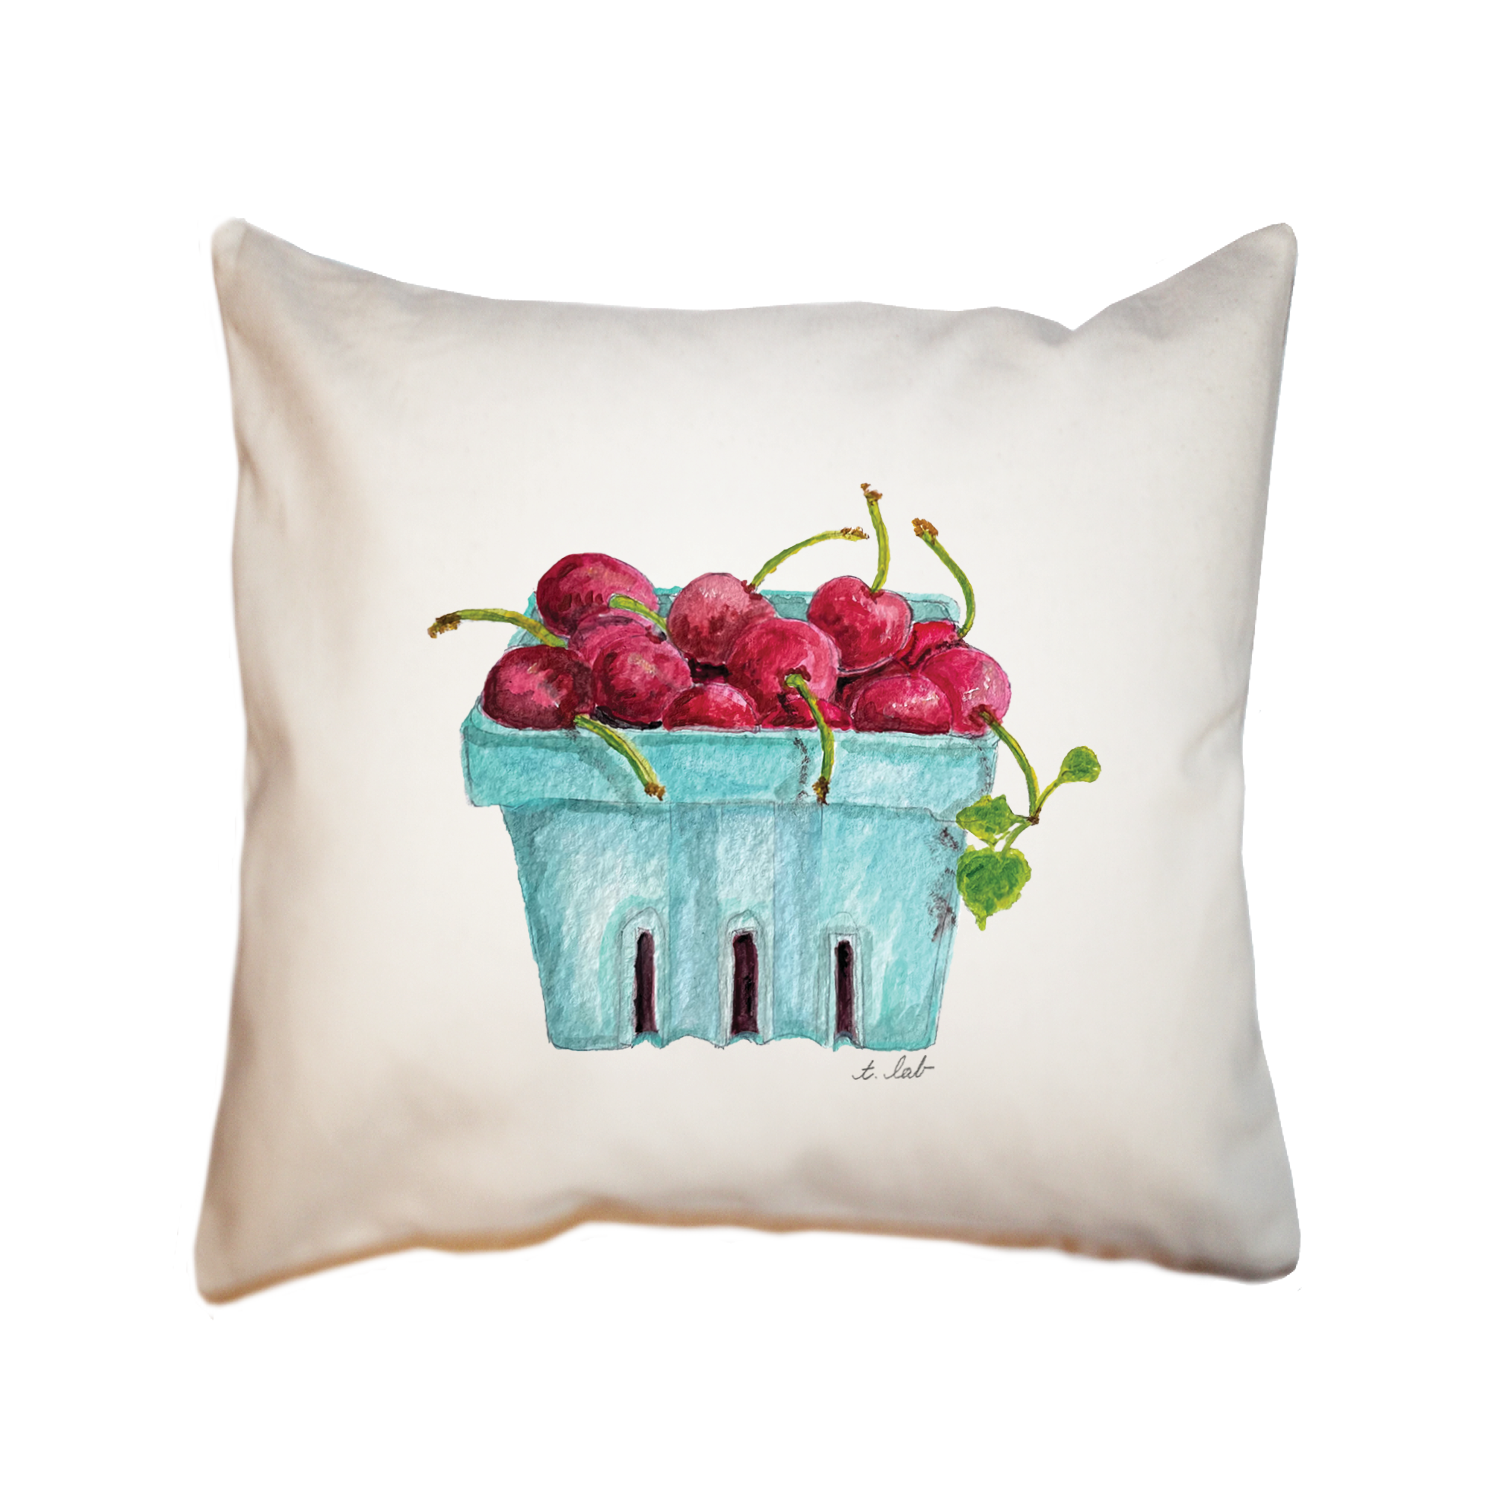 pint of cherries square pillow